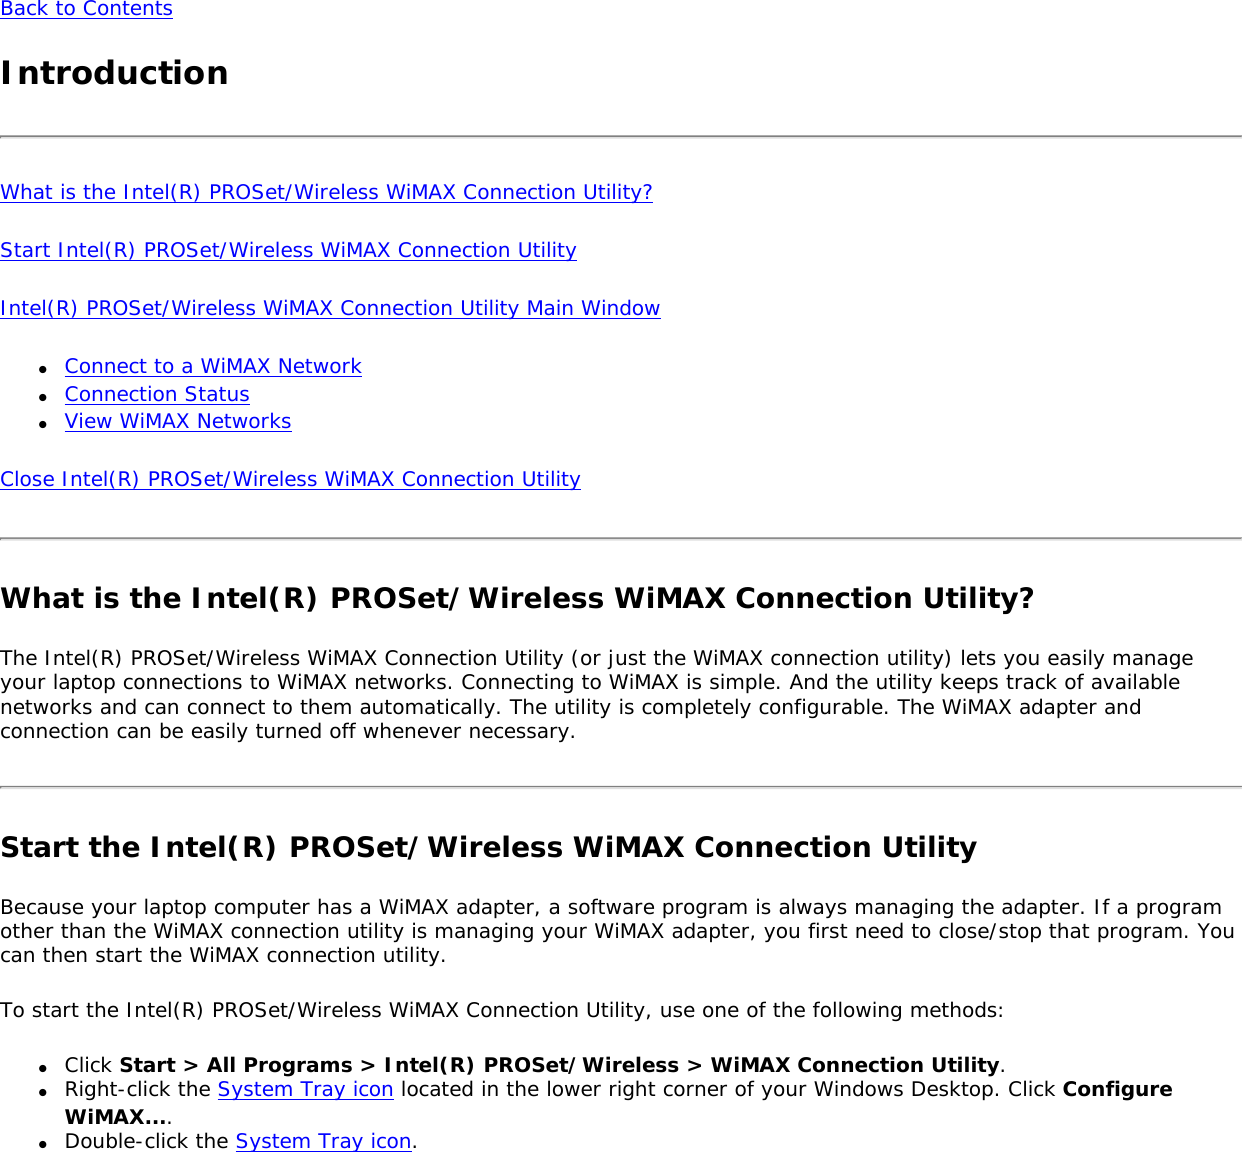 Back to ContentsIntroductionWhat is the Intel(R) PROSet/Wireless WiMAX Connection Utility?Start Intel(R) PROSet/Wireless WiMAX Connection UtilityIntel(R) PROSet/Wireless WiMAX Connection Utility Main Window●     Connect to a WiMAX Network●     Connection Status●     View WiMAX NetworksClose Intel(R) PROSet/Wireless WiMAX Connection Utility What is the Intel(R) PROSet/Wireless WiMAX Connection Utility?The Intel(R) PROSet/Wireless WiMAX Connection Utility (or just the WiMAX connection utility) lets you easily manage your laptop connections to WiMAX networks. Connecting to WiMAX is simple. And the utility keeps track of available networks and can connect to them automatically. The utility is completely configurable. The WiMAX adapter and connection can be easily turned off whenever necessary. Start the Intel(R) PROSet/Wireless WiMAX Connection UtilityBecause your laptop computer has a WiMAX adapter, a software program is always managing the adapter. If a program other than the WiMAX connection utility is managing your WiMAX adapter, you first need to close/stop that program. You can then start the WiMAX connection utility.To start the Intel(R) PROSet/Wireless WiMAX Connection Utility, use one of the following methods:●     Click Start &gt; All Programs &gt; Intel(R) PROSet/Wireless &gt; WiMAX Connection Utility.●     Right-click the System Tray icon located in the lower right corner of your Windows Desktop. Click Configure WiMAX....●     Double-click the System Tray icon. 